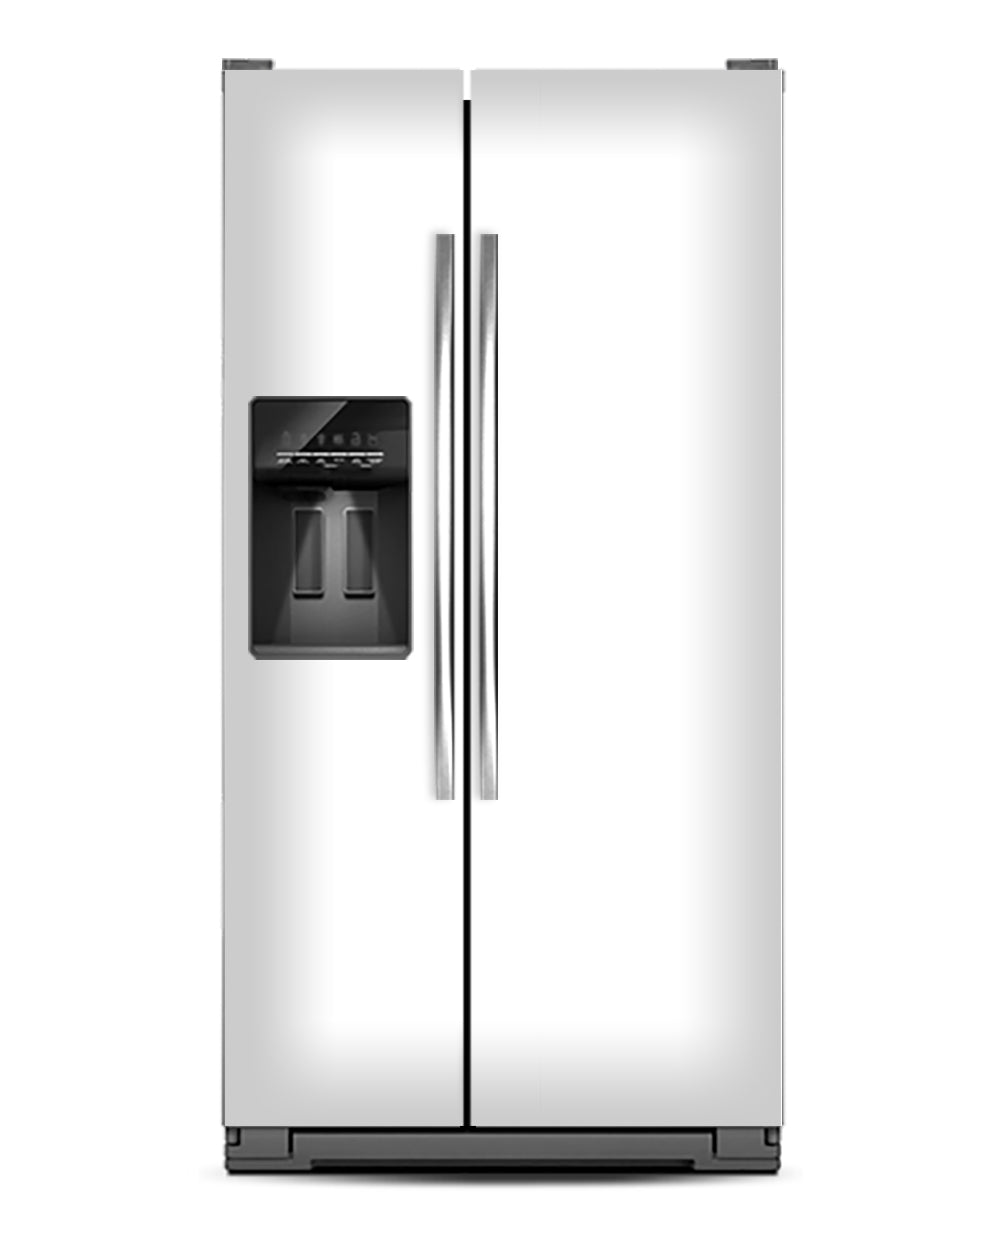 Magnetic White Refrigerator Skin Cover Panel Wraps